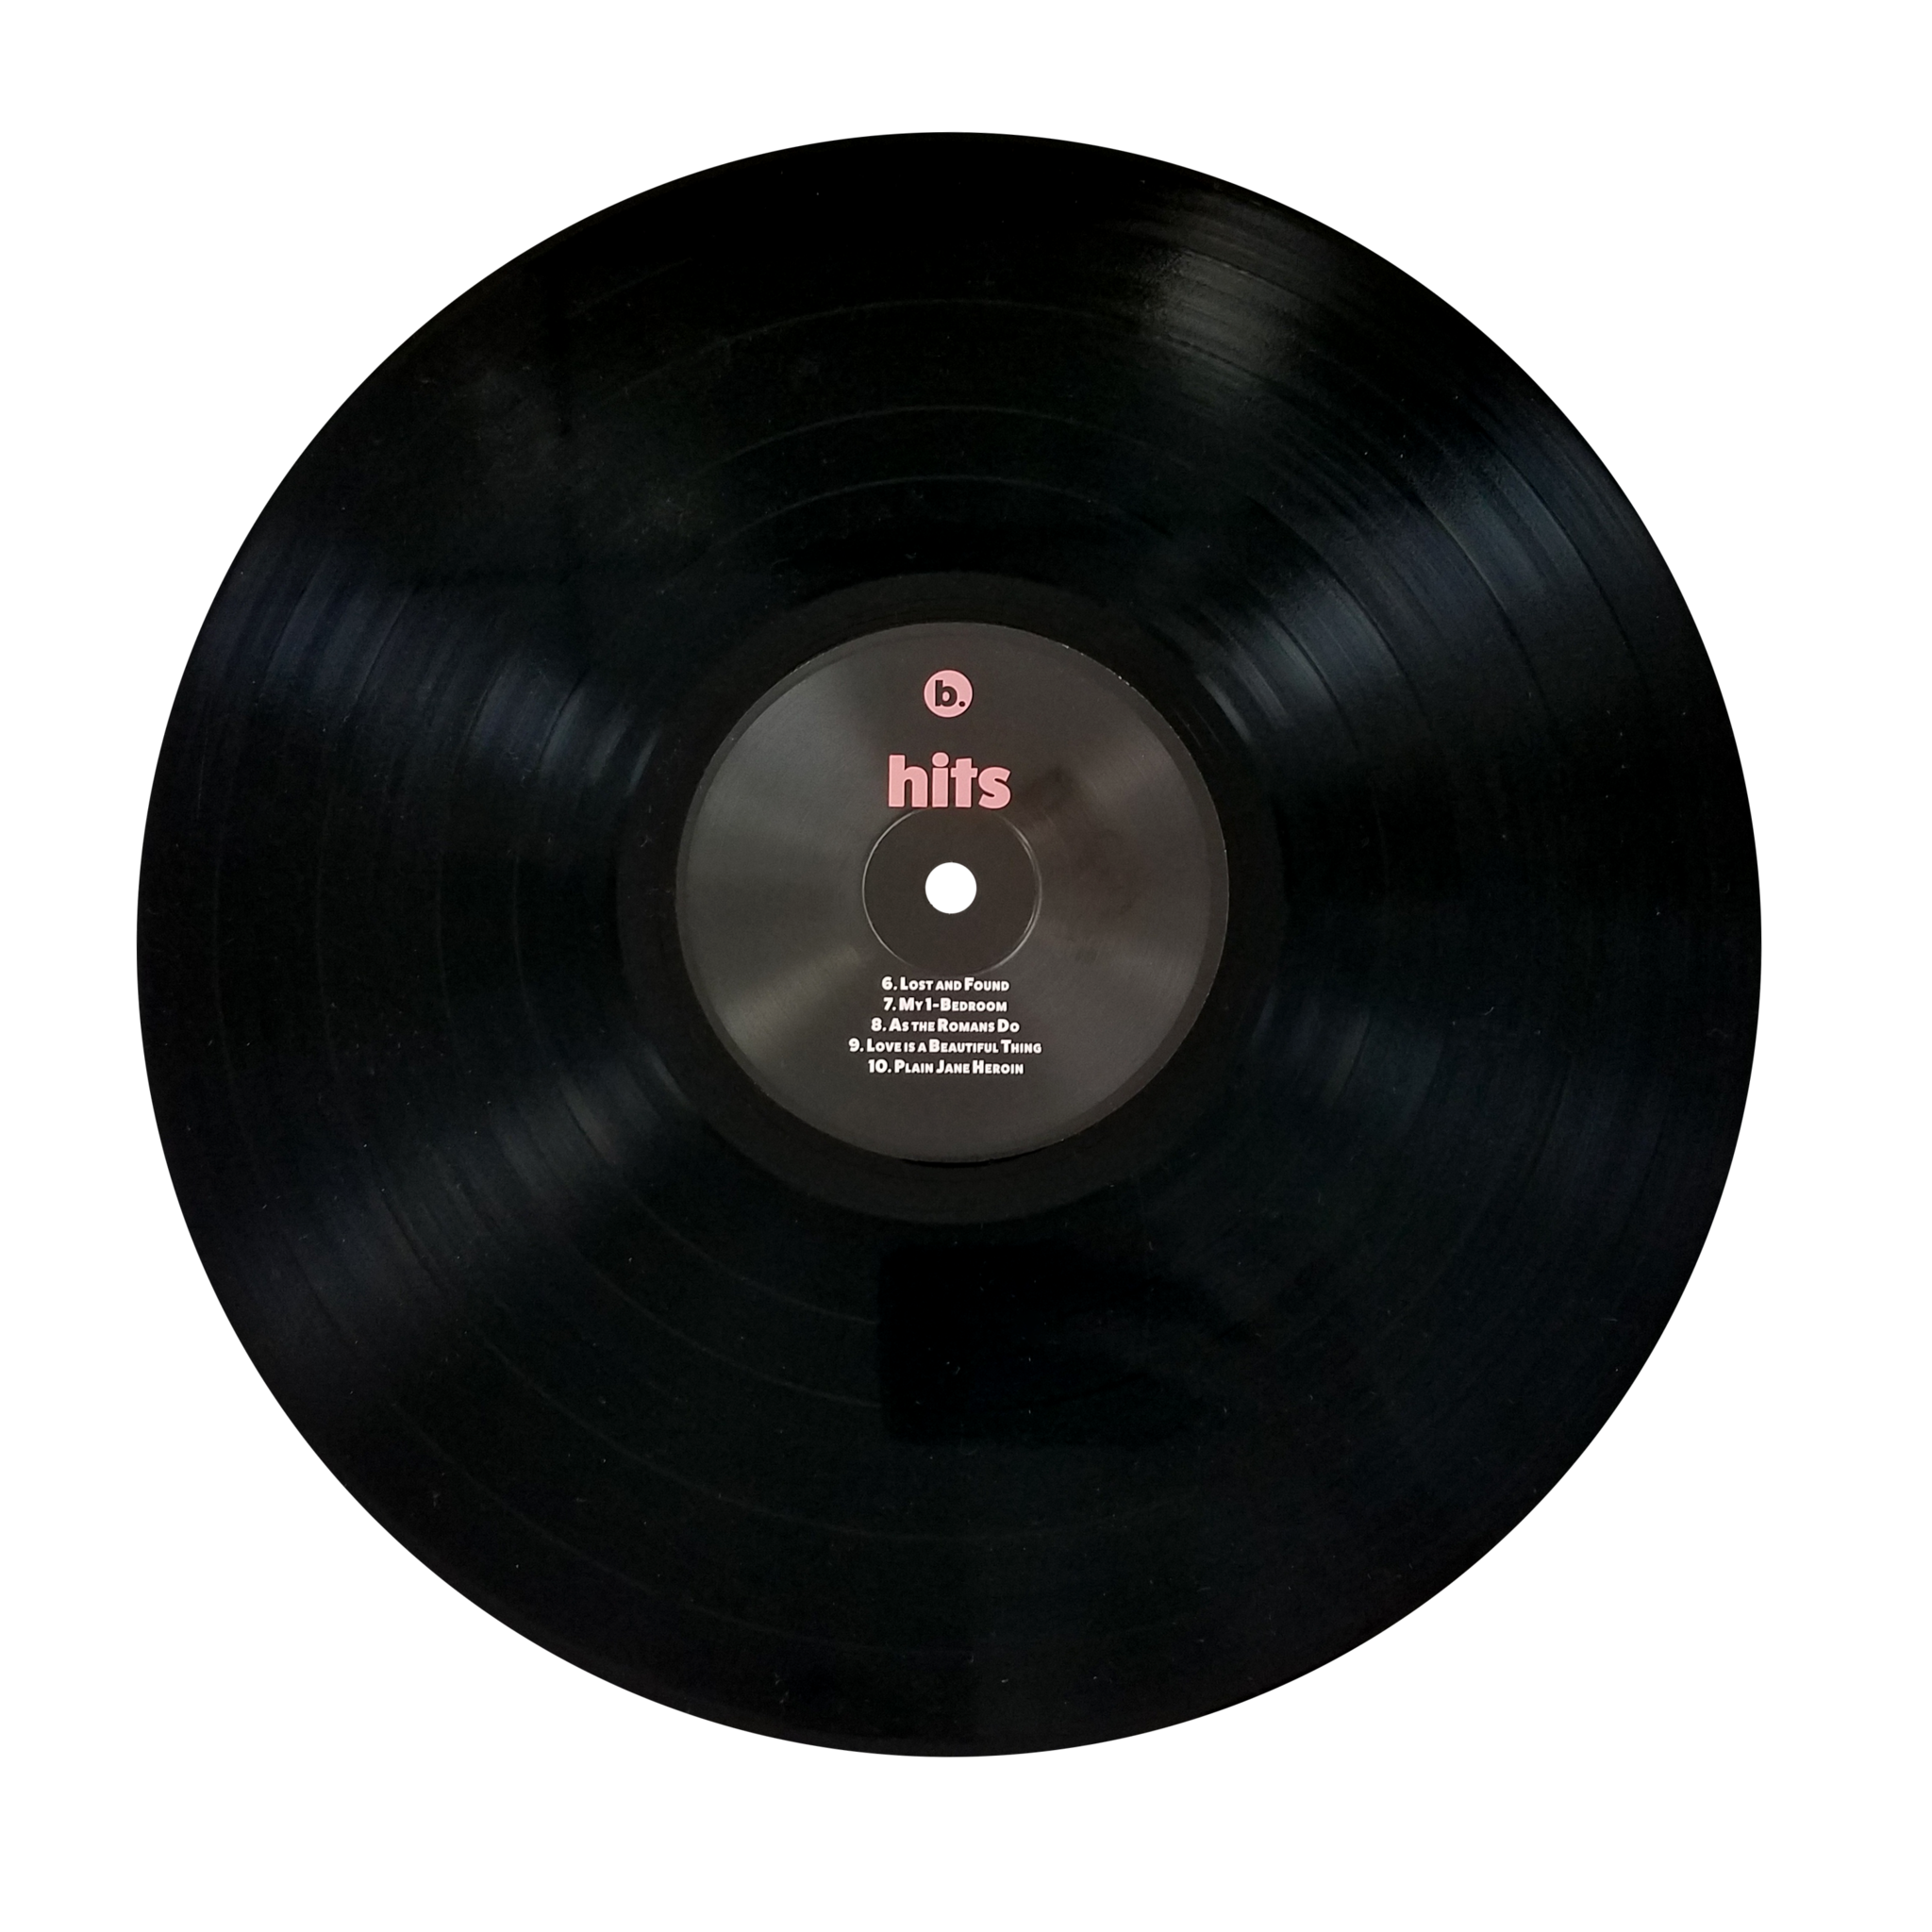 Vinyl record-objects- PNG image with transparent background